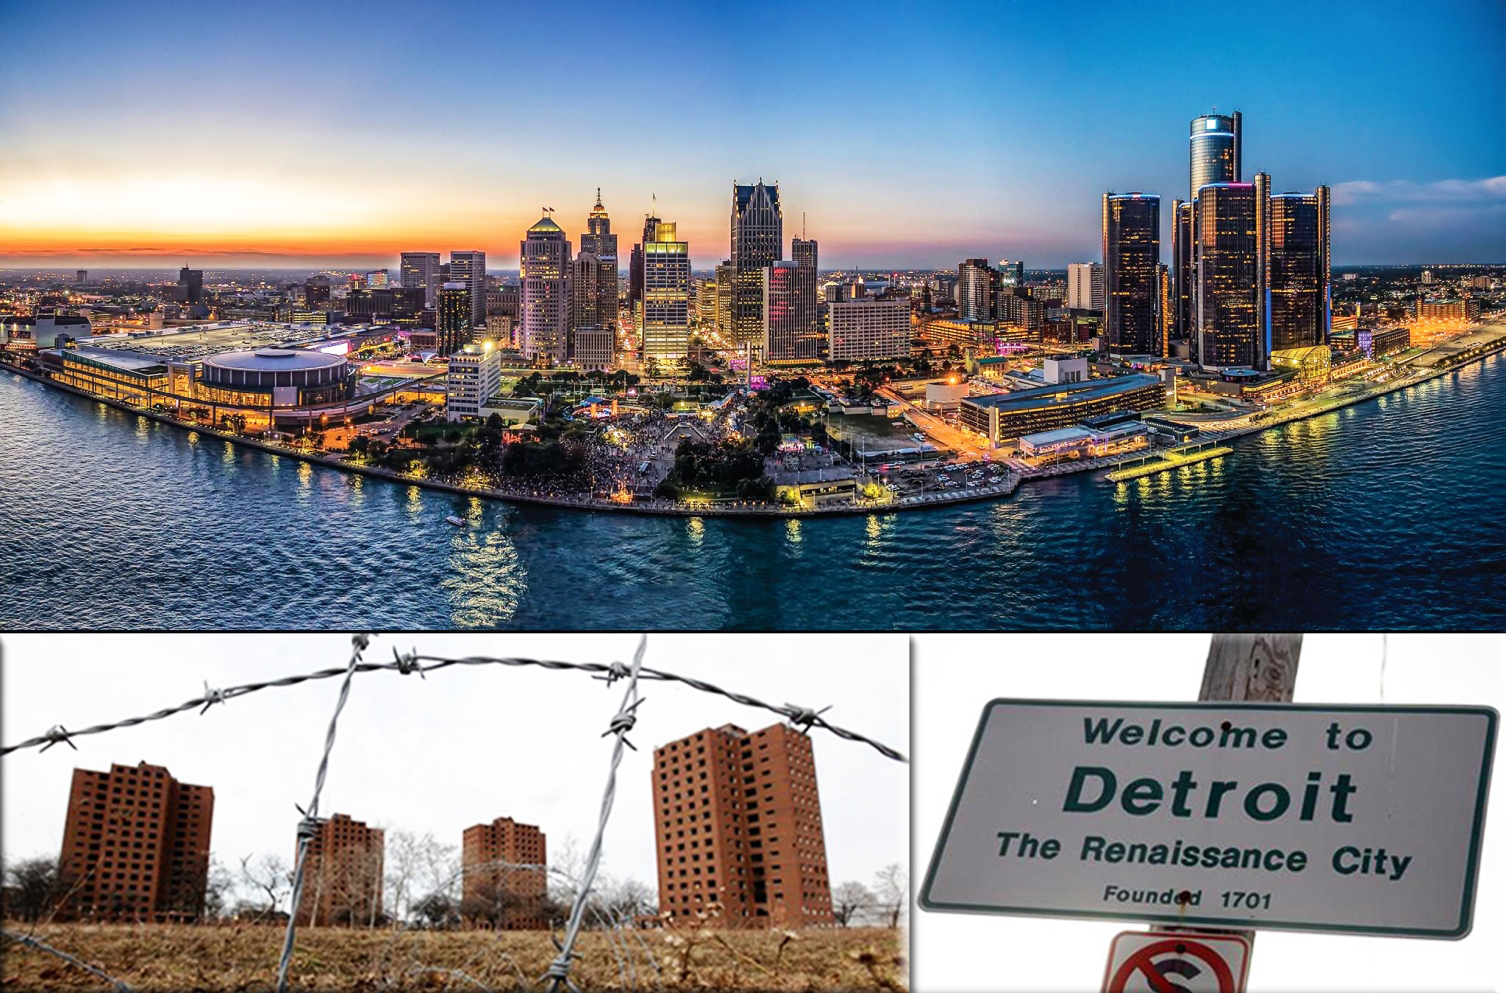 The Government of Detroit, with up to $20 billion in debt, files for the largest municipal bankruptcy in U.S. history.